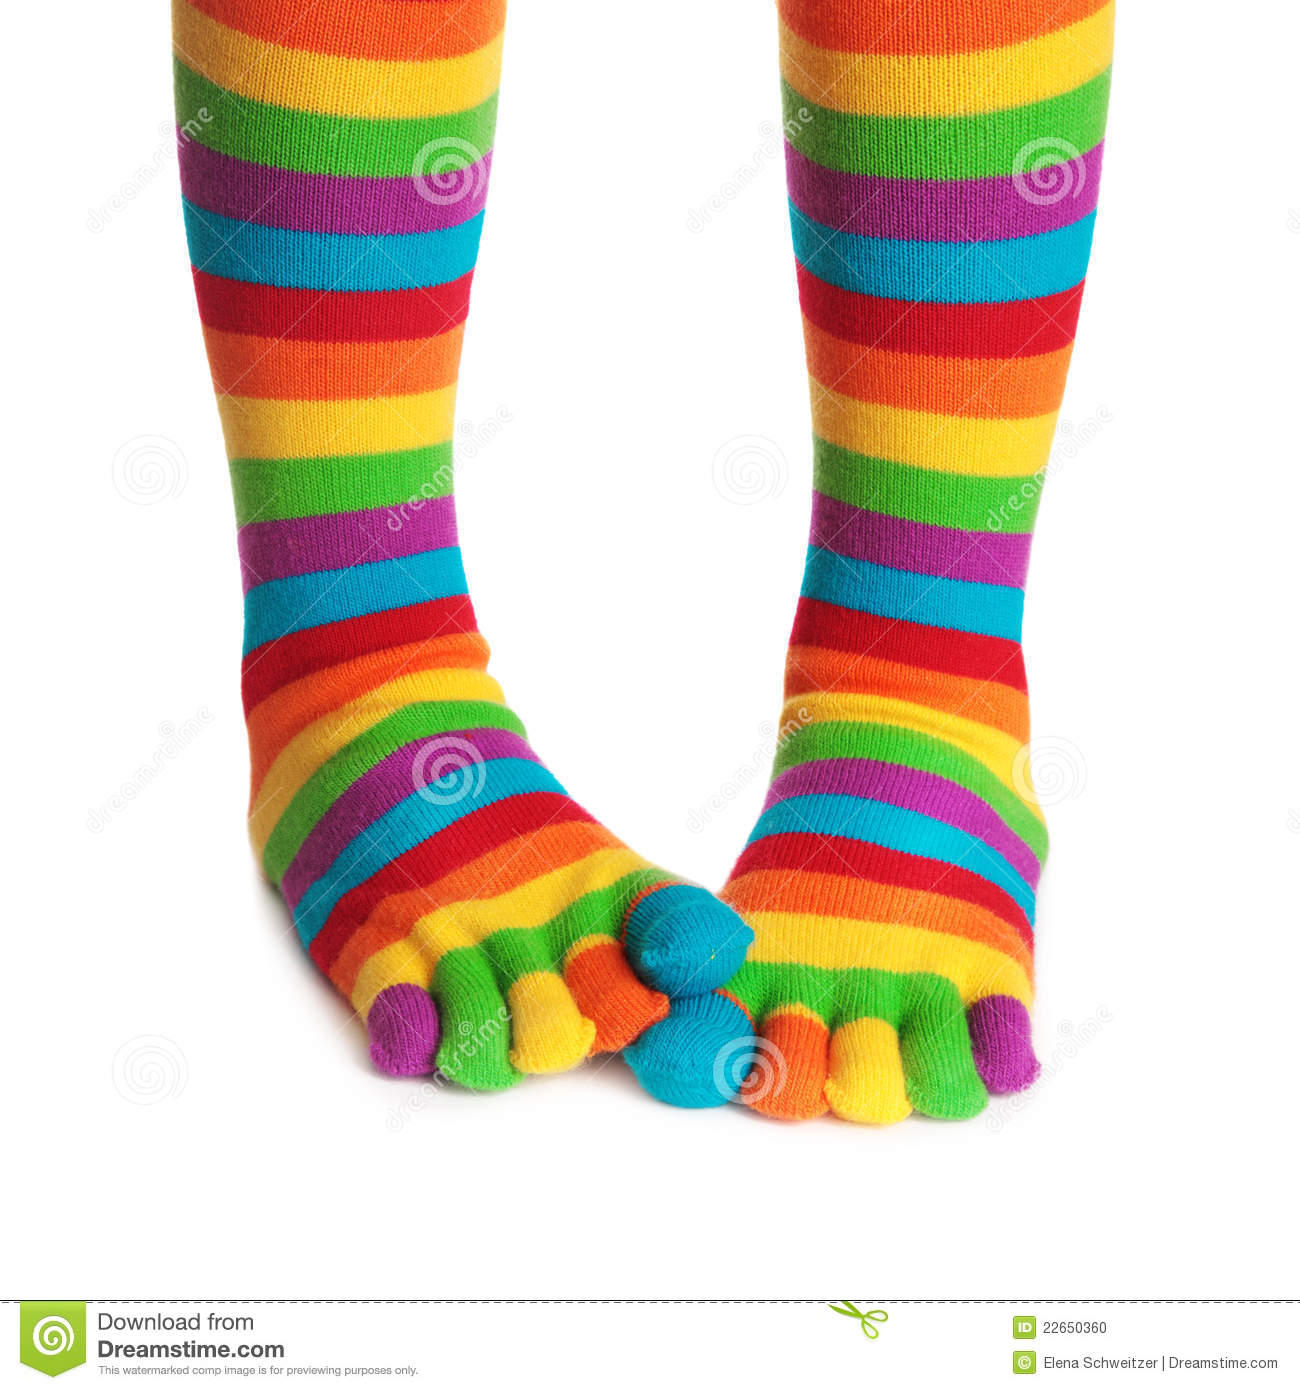 More Similar Stock Images Of   Colorful Striped Socks  